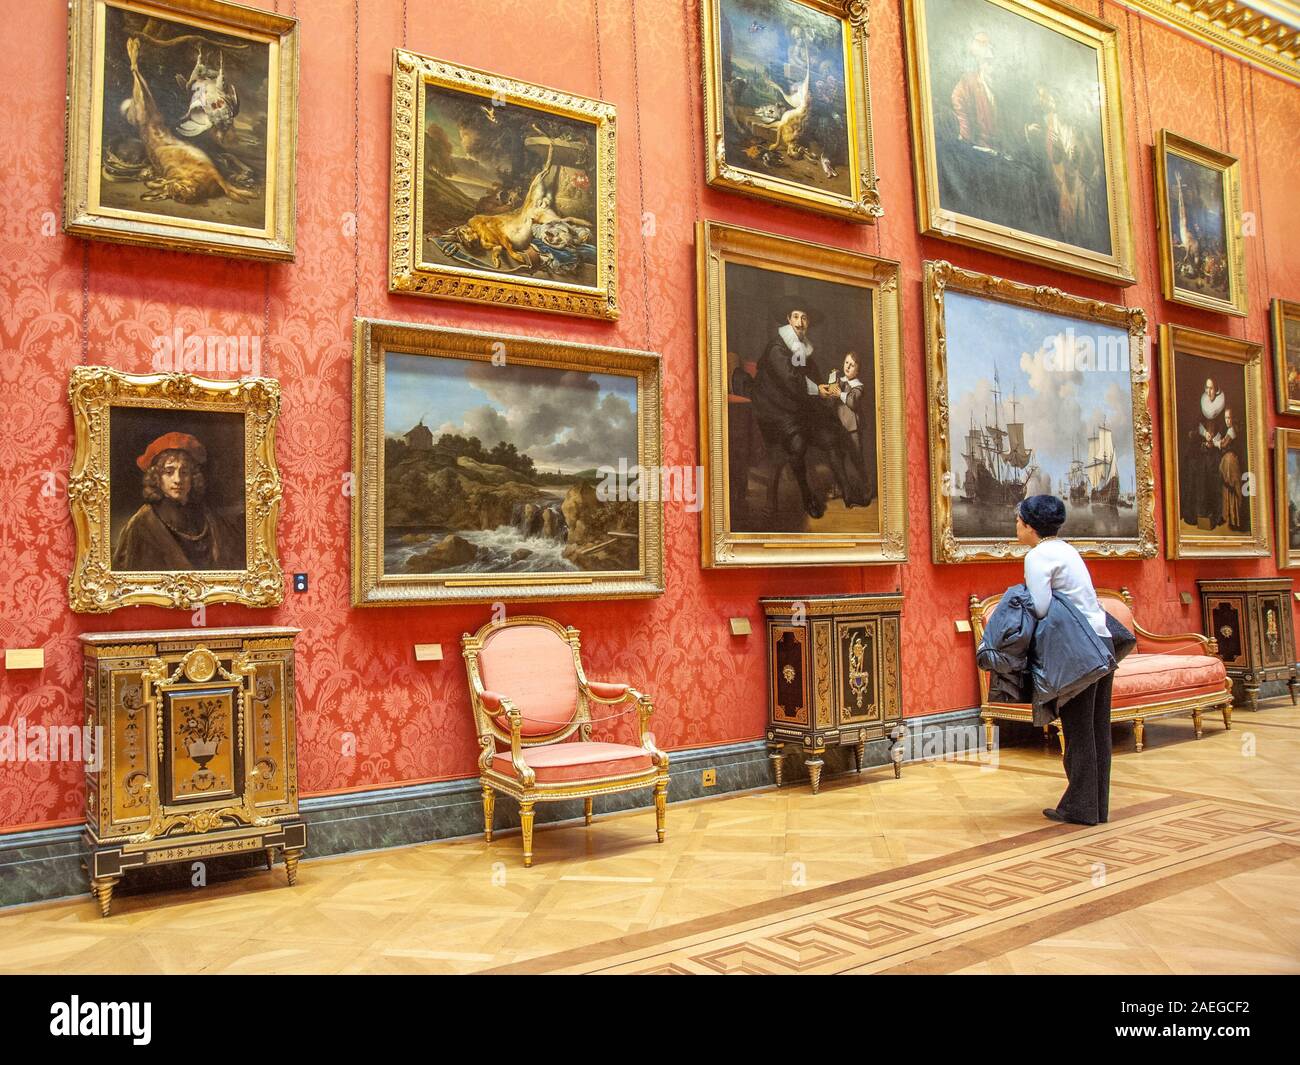 Visitor Looking At Paintings In National Gallery In London, 47% OFF